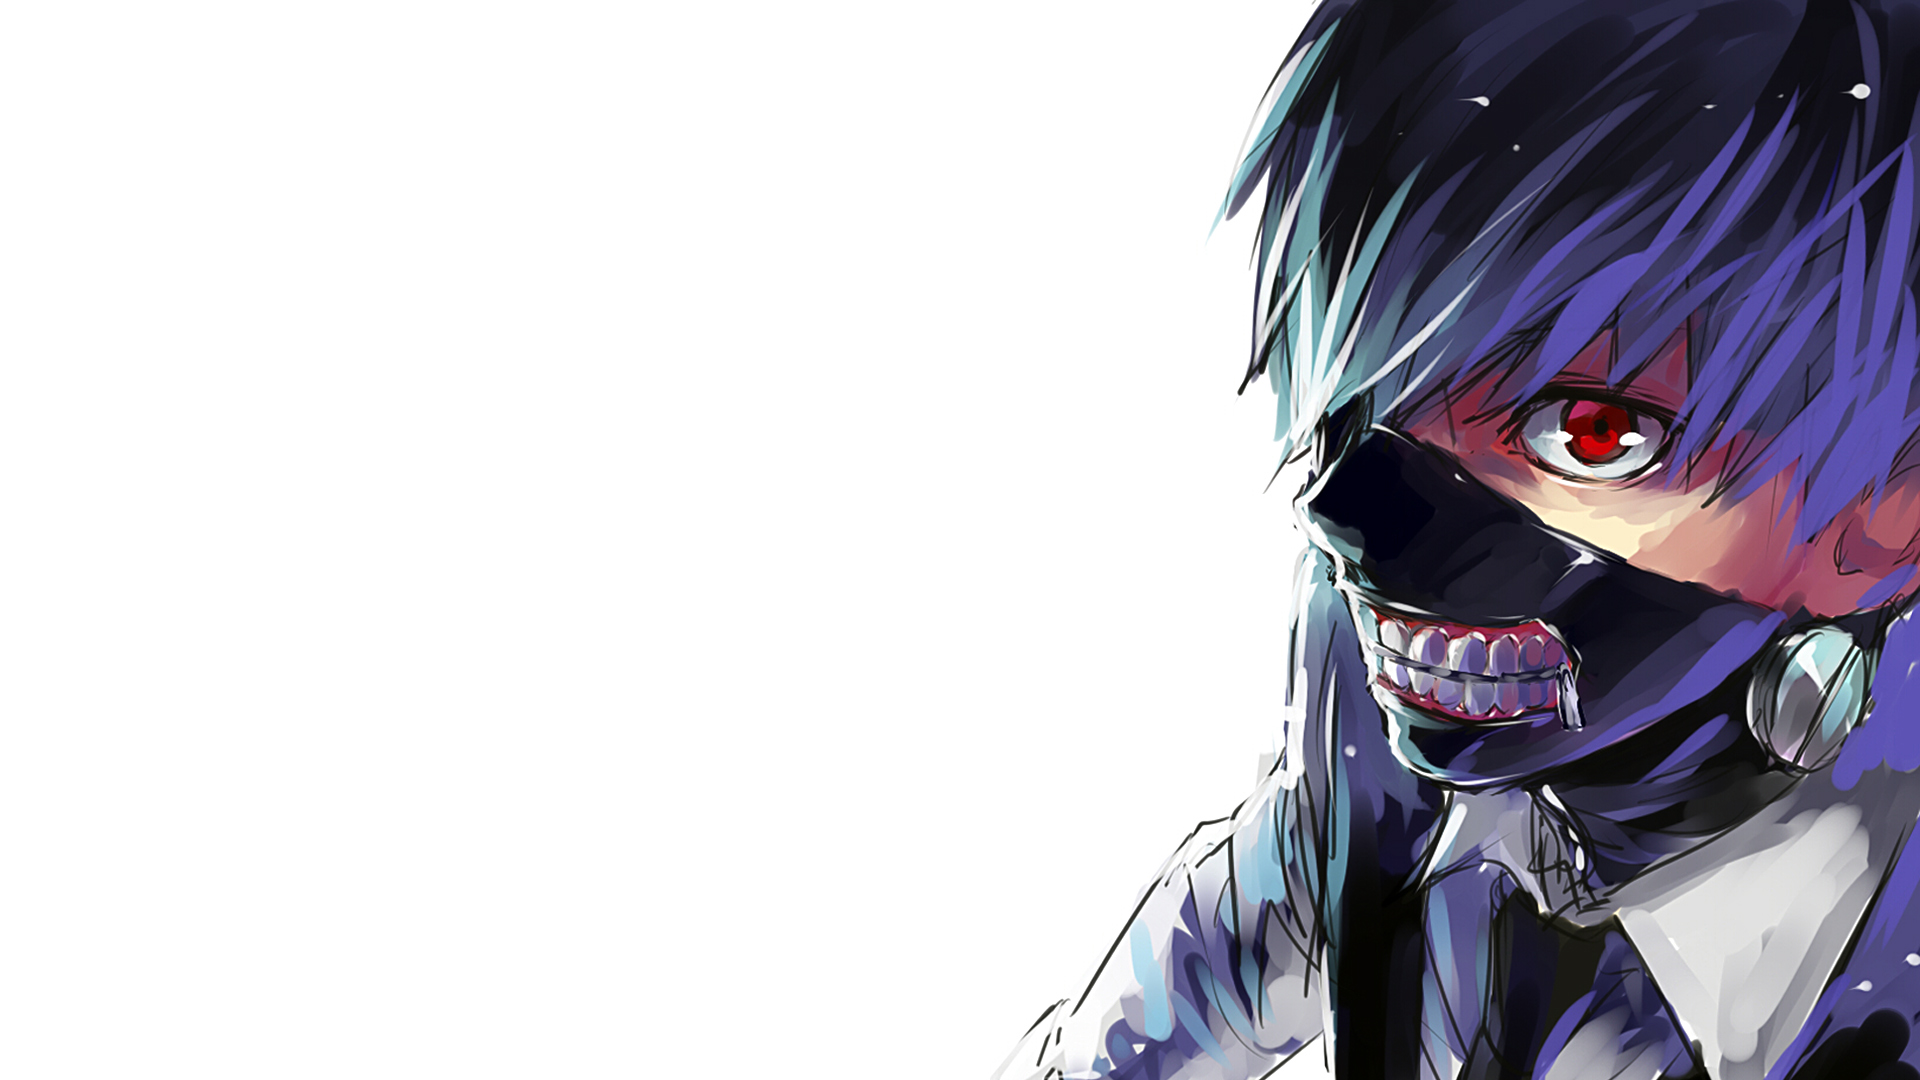 Mask Tokyo Ghoul Anime HD Wallpaper Anonforge